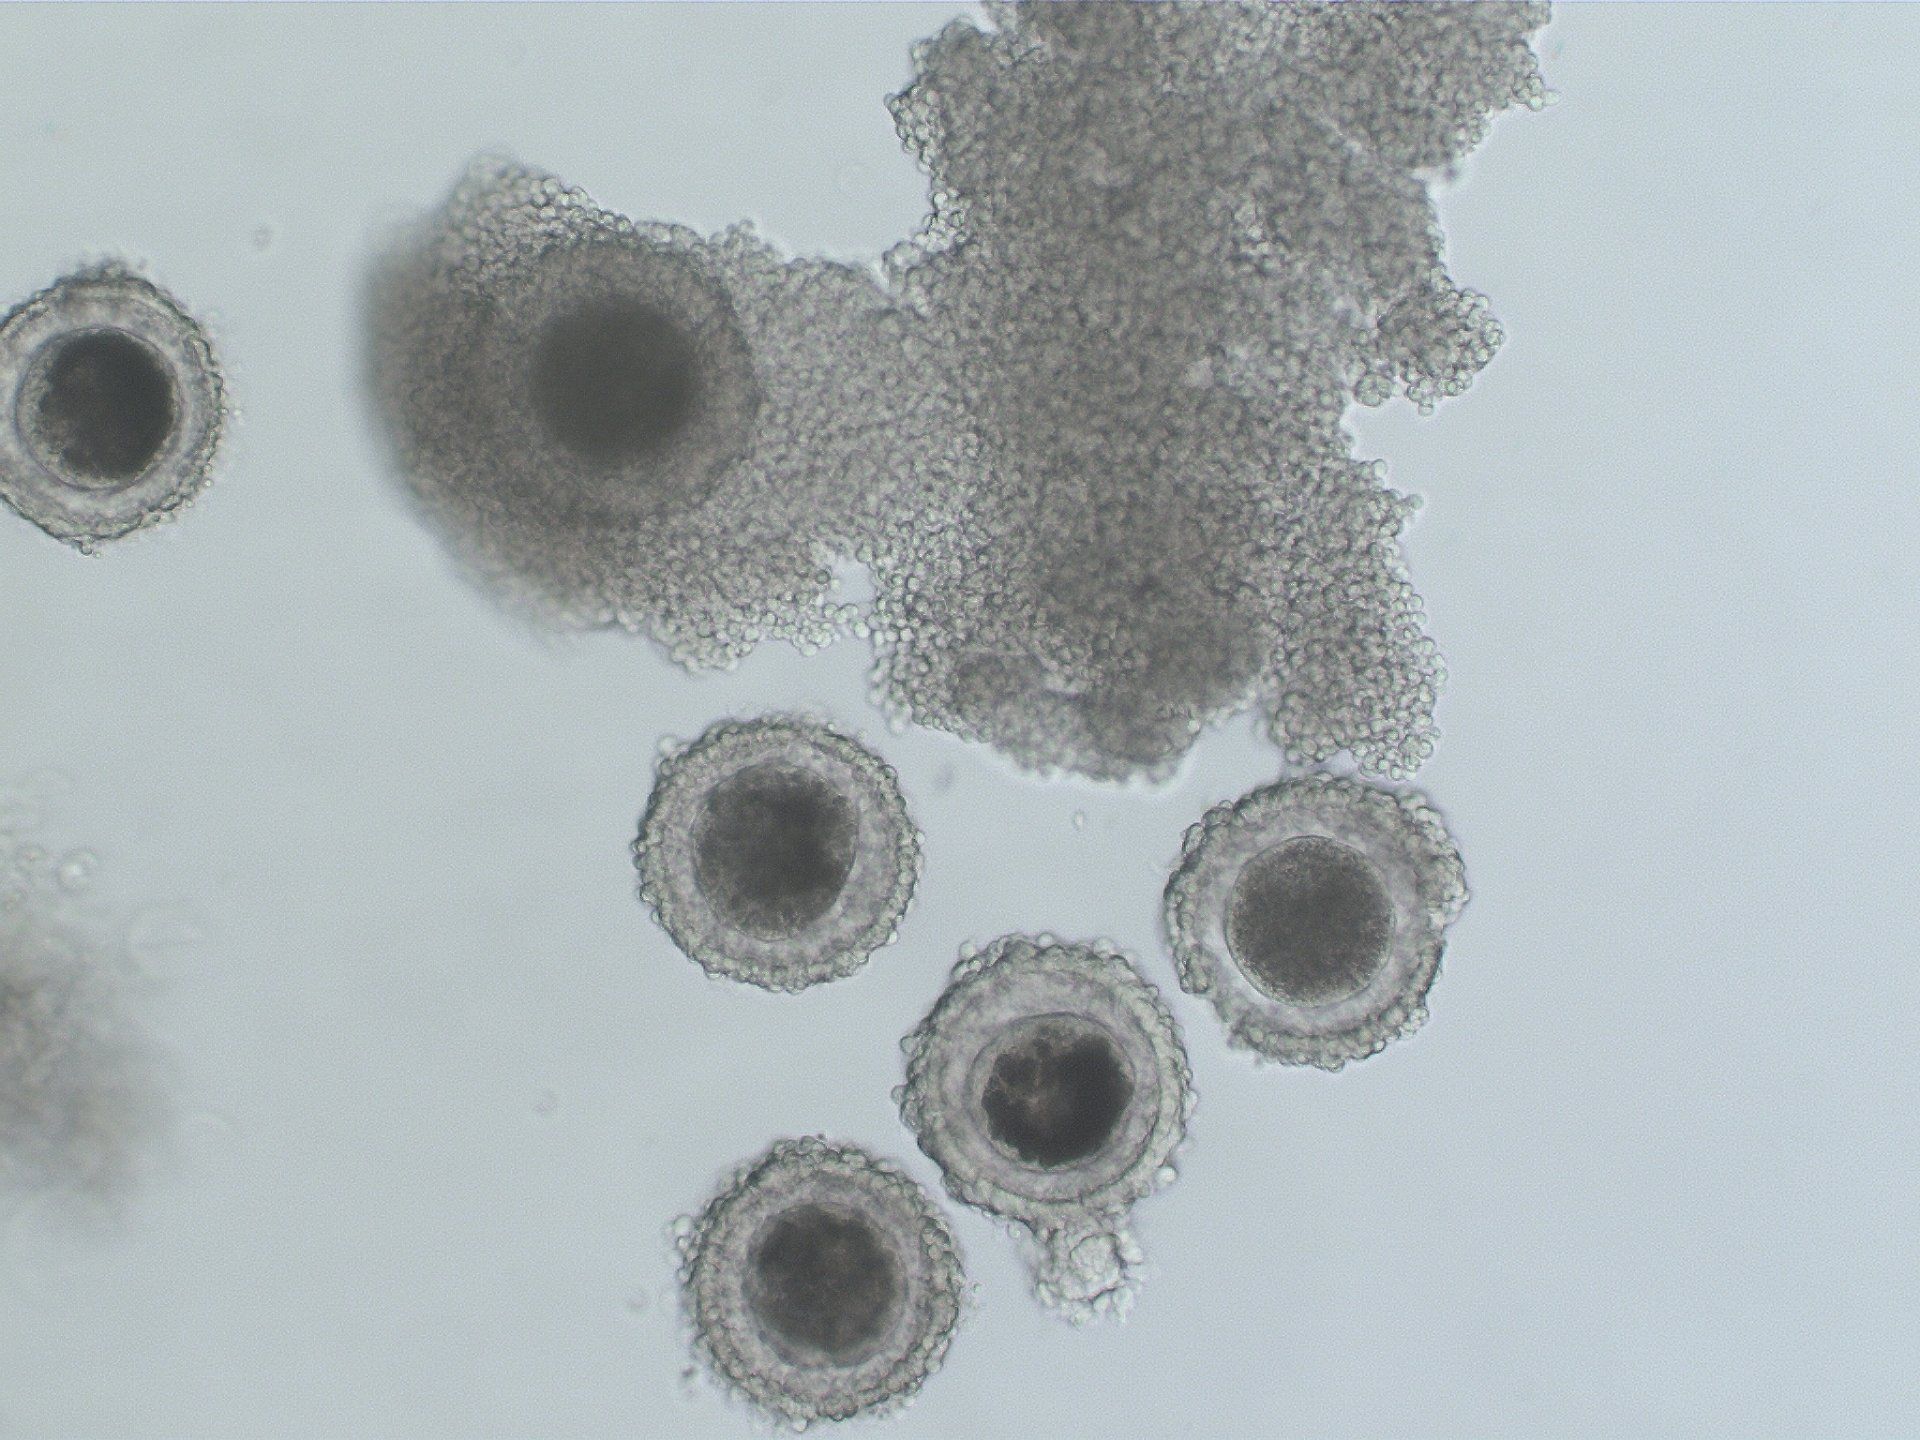 Immature oocytes collected from a single mare. The oocytes are surrounded by tight, compact cumulus cells.